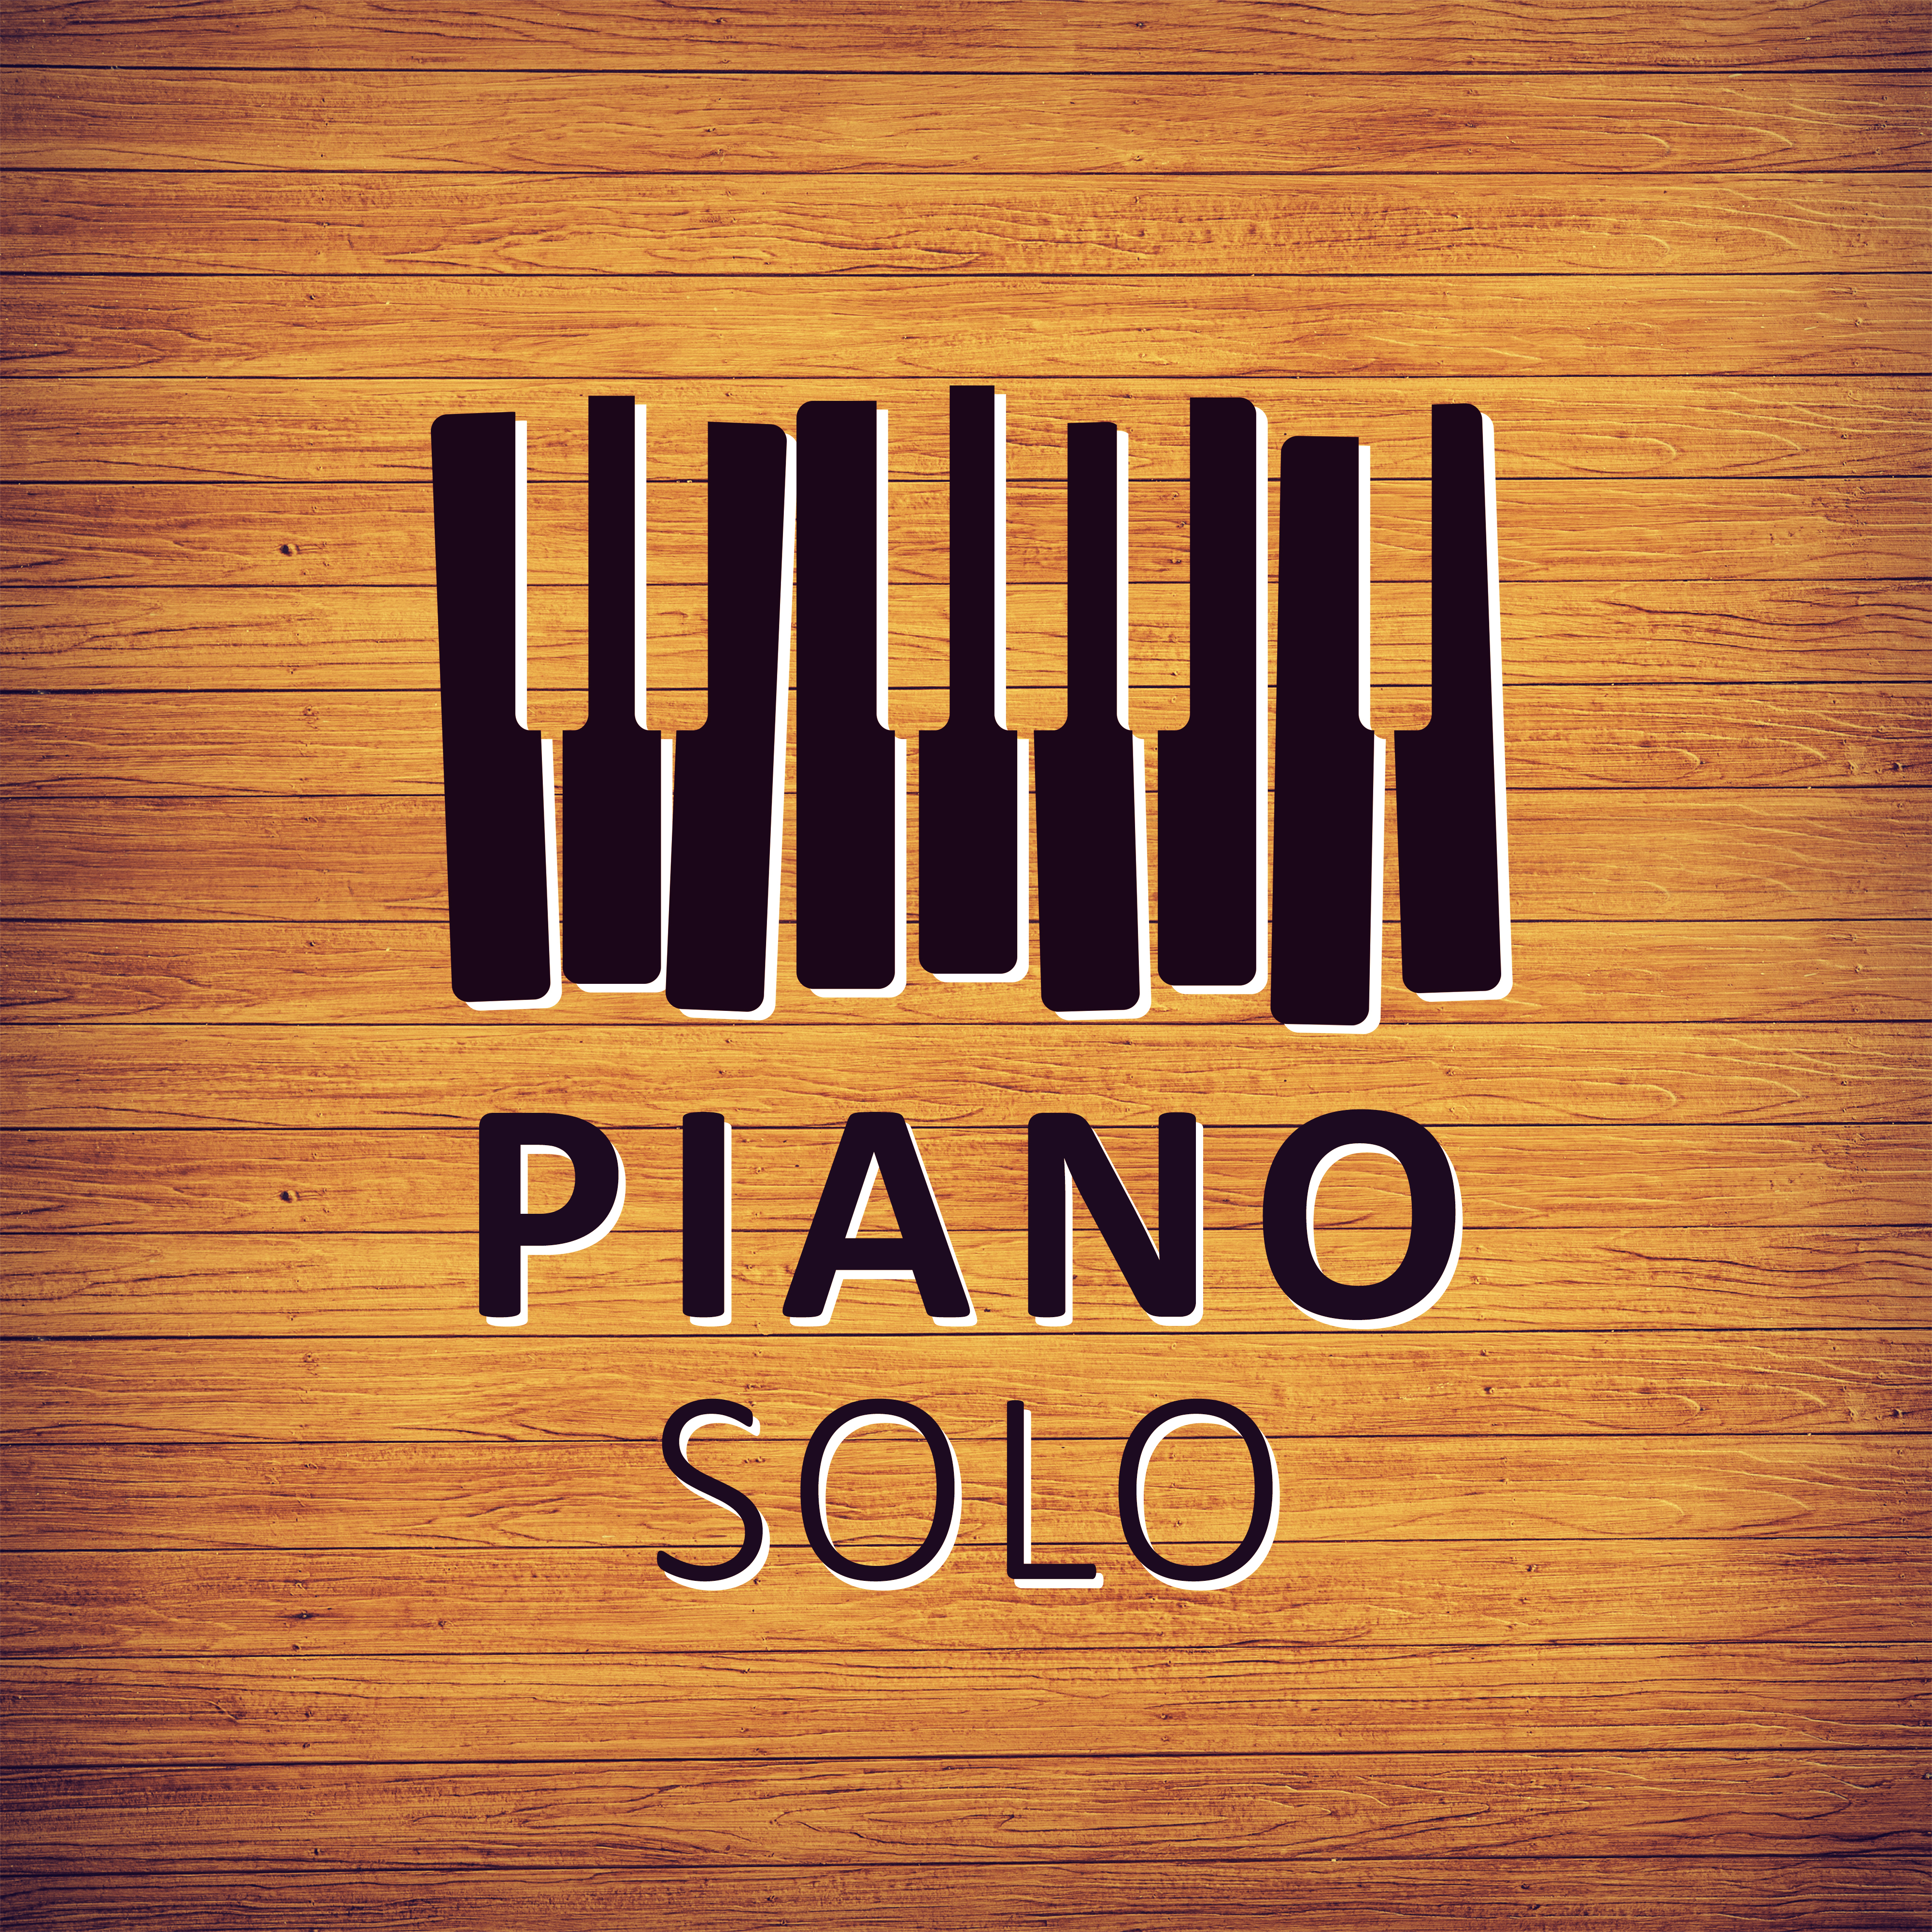 Piano Solo – Sensual Jazz, Instrumental Music for Background to Restaurant, Dinner Party Music, Smooth Jazz